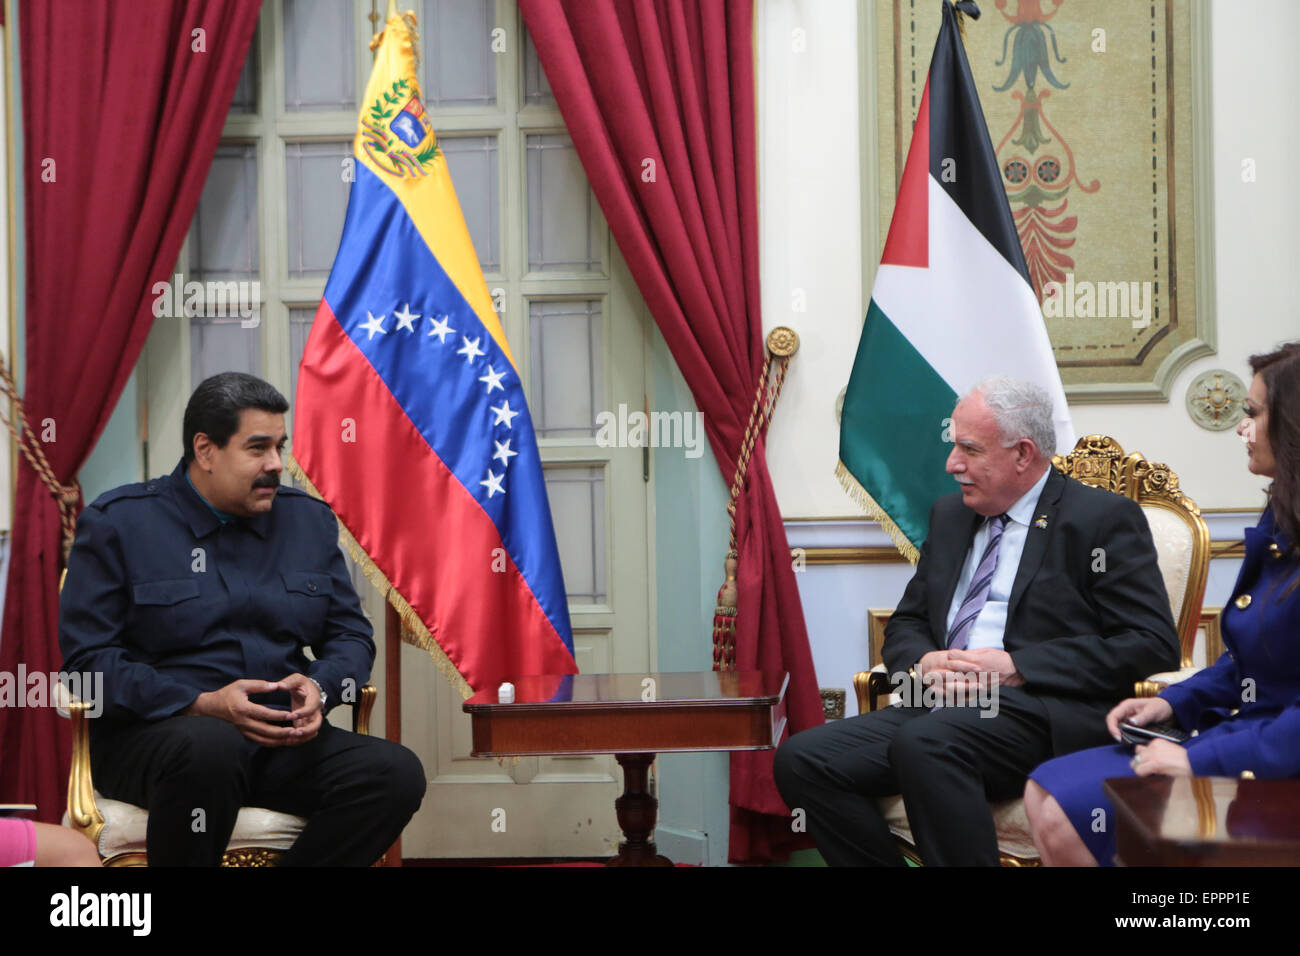 Caracas. 20th May, 2015. Venezuela's President Nicolas Maduro (L) meets with Palestinian Foreign Minister Riyad al-Maliki in Caracas May 20, 2015. © Venezuela's Presidency/AVN/Xinhua/Alamy Live News Stock Photo